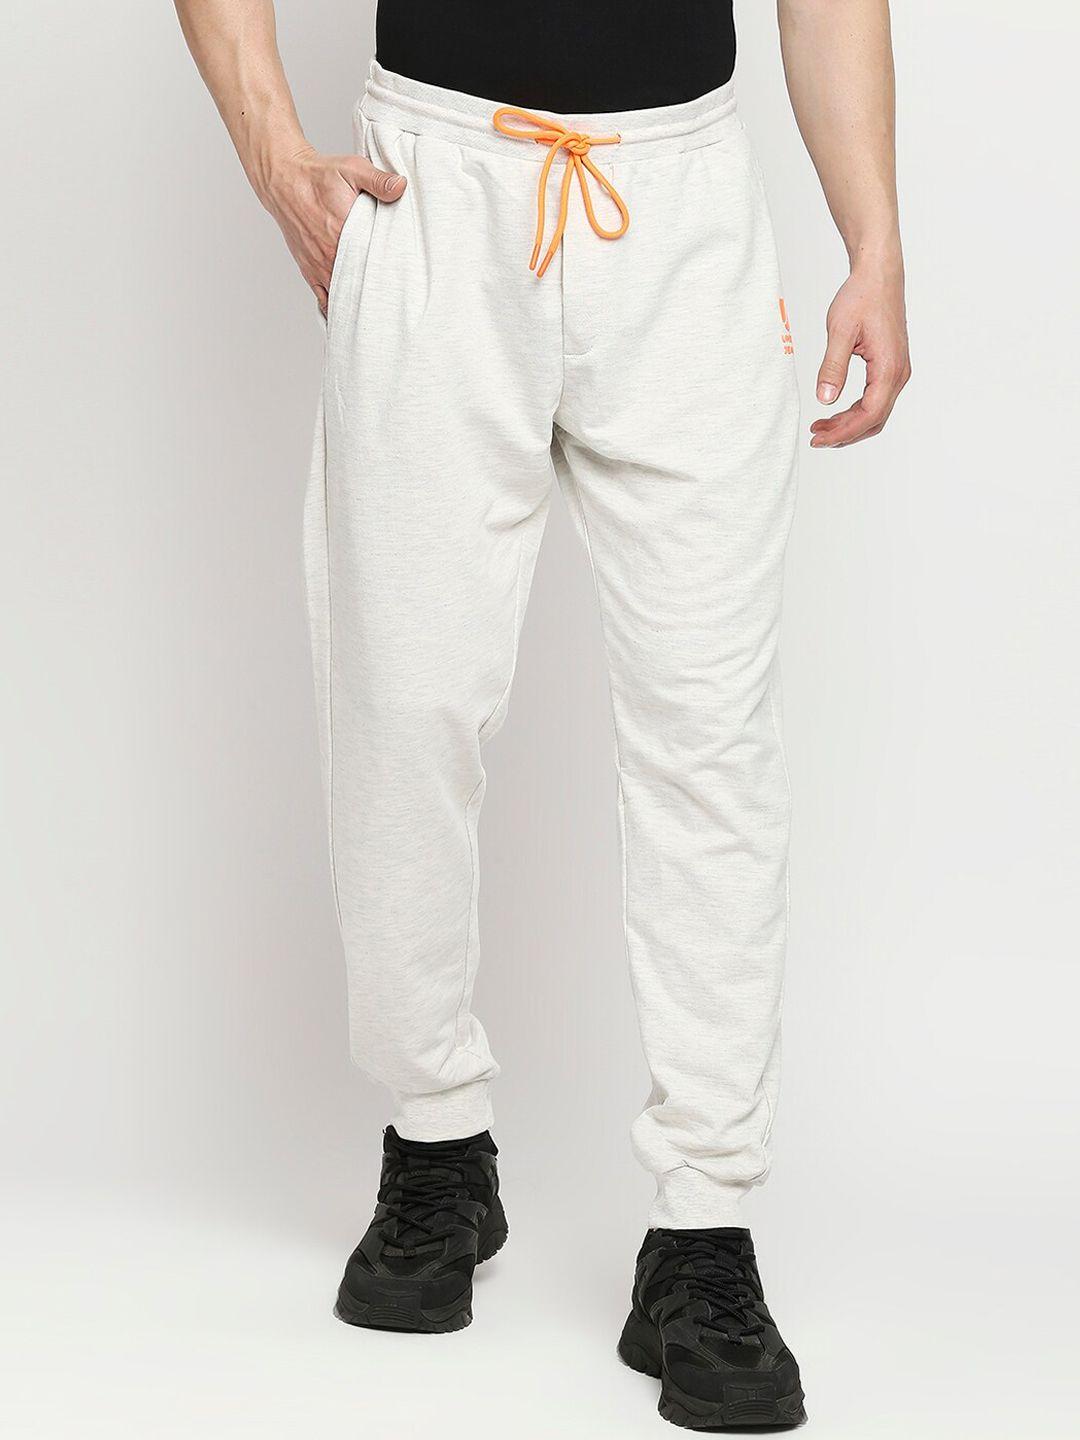 underjeans by spykar men off-white solid joggers